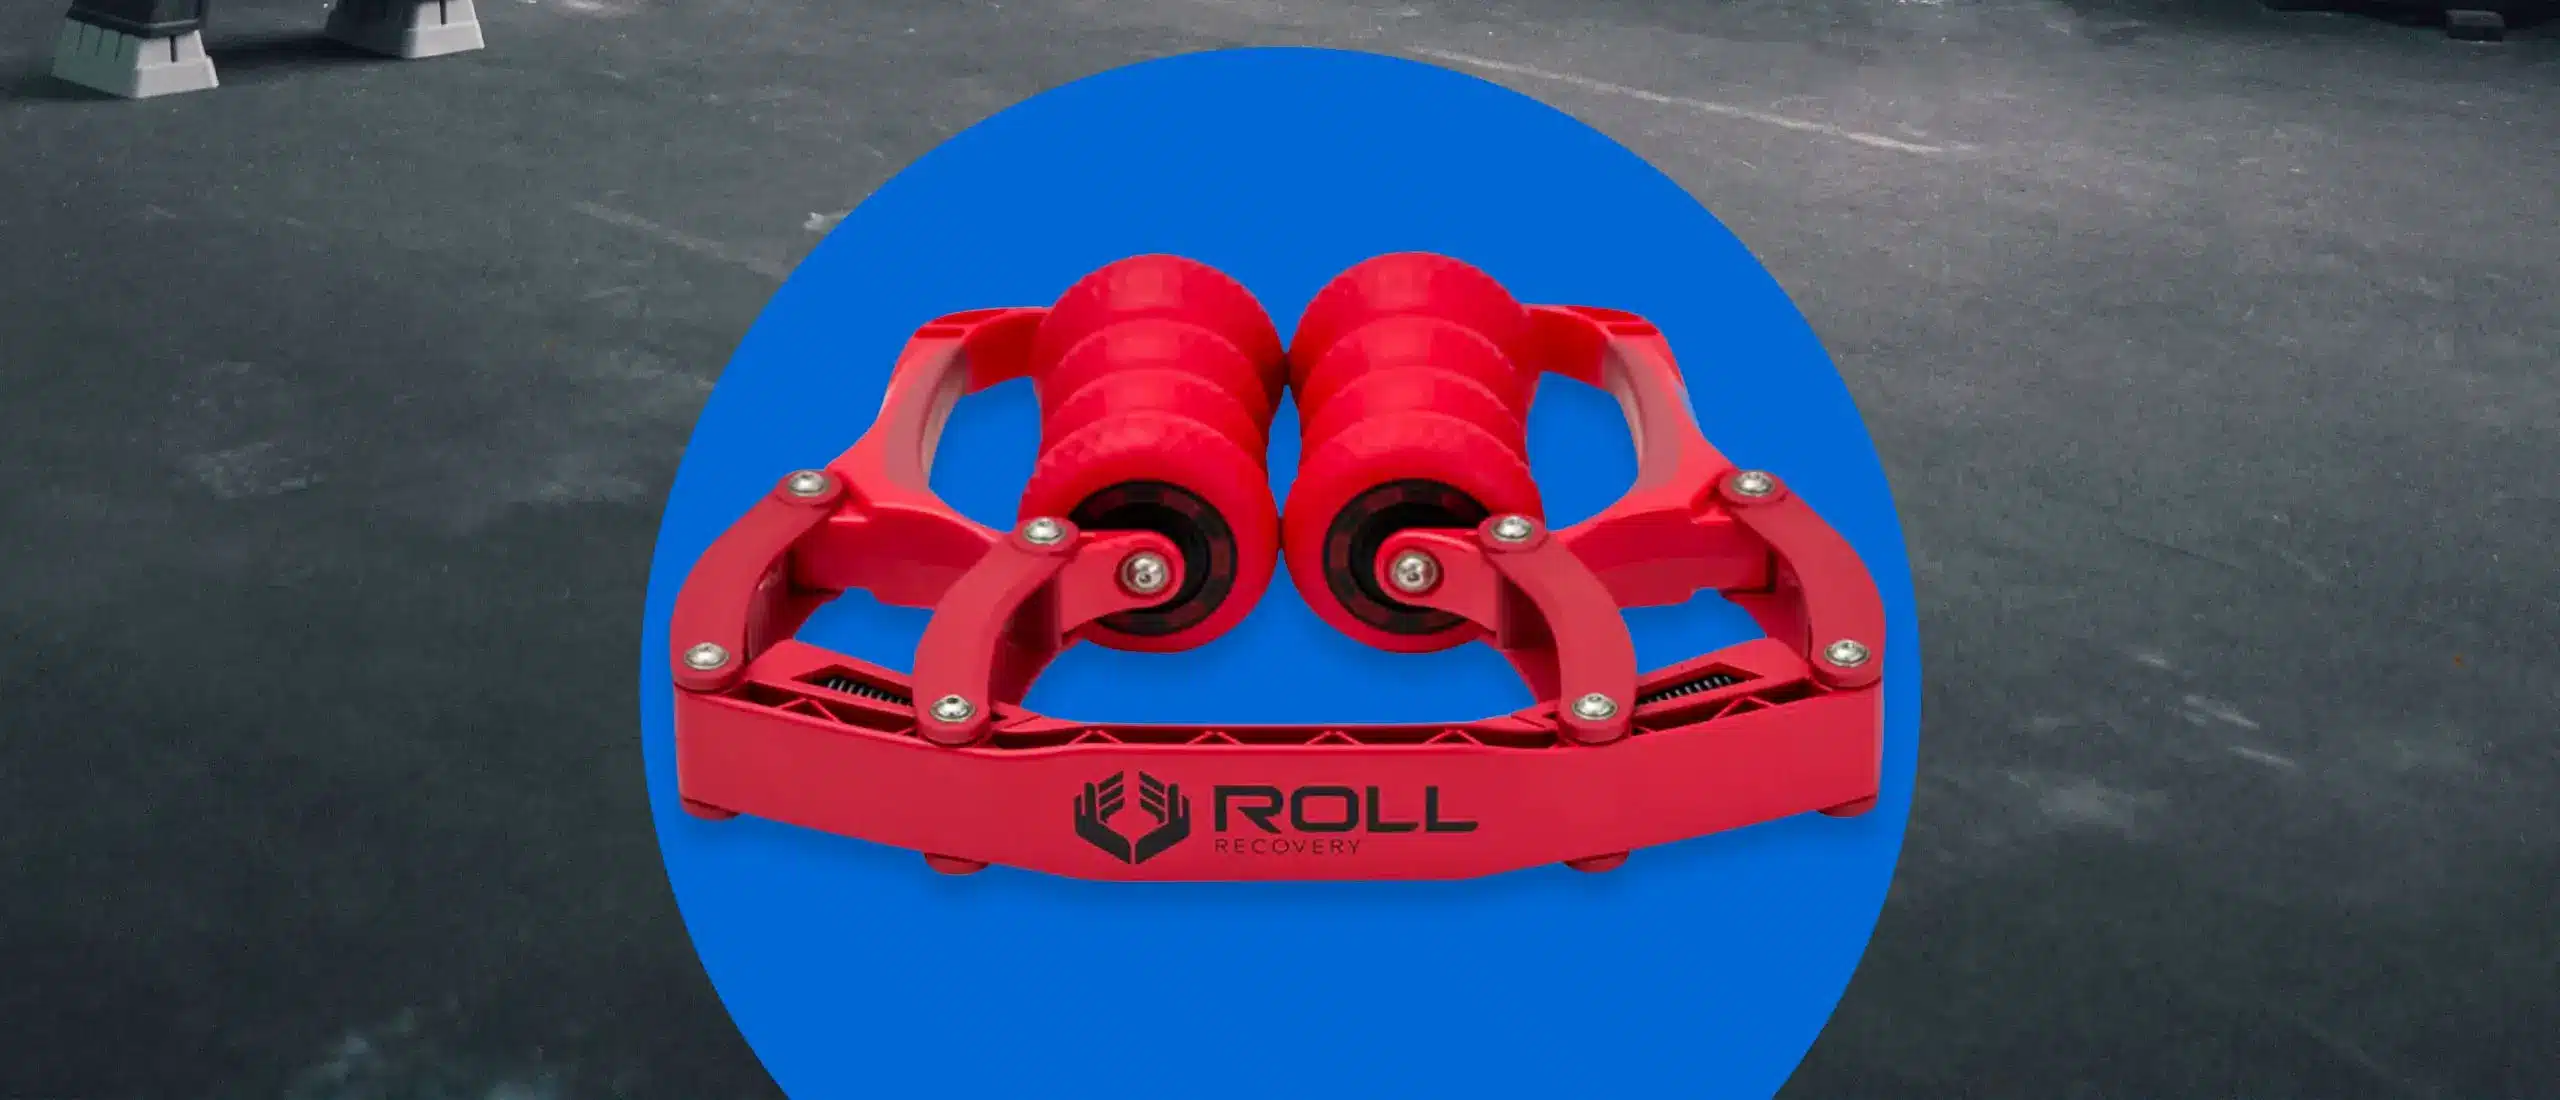 Roll Recovery R8 tool